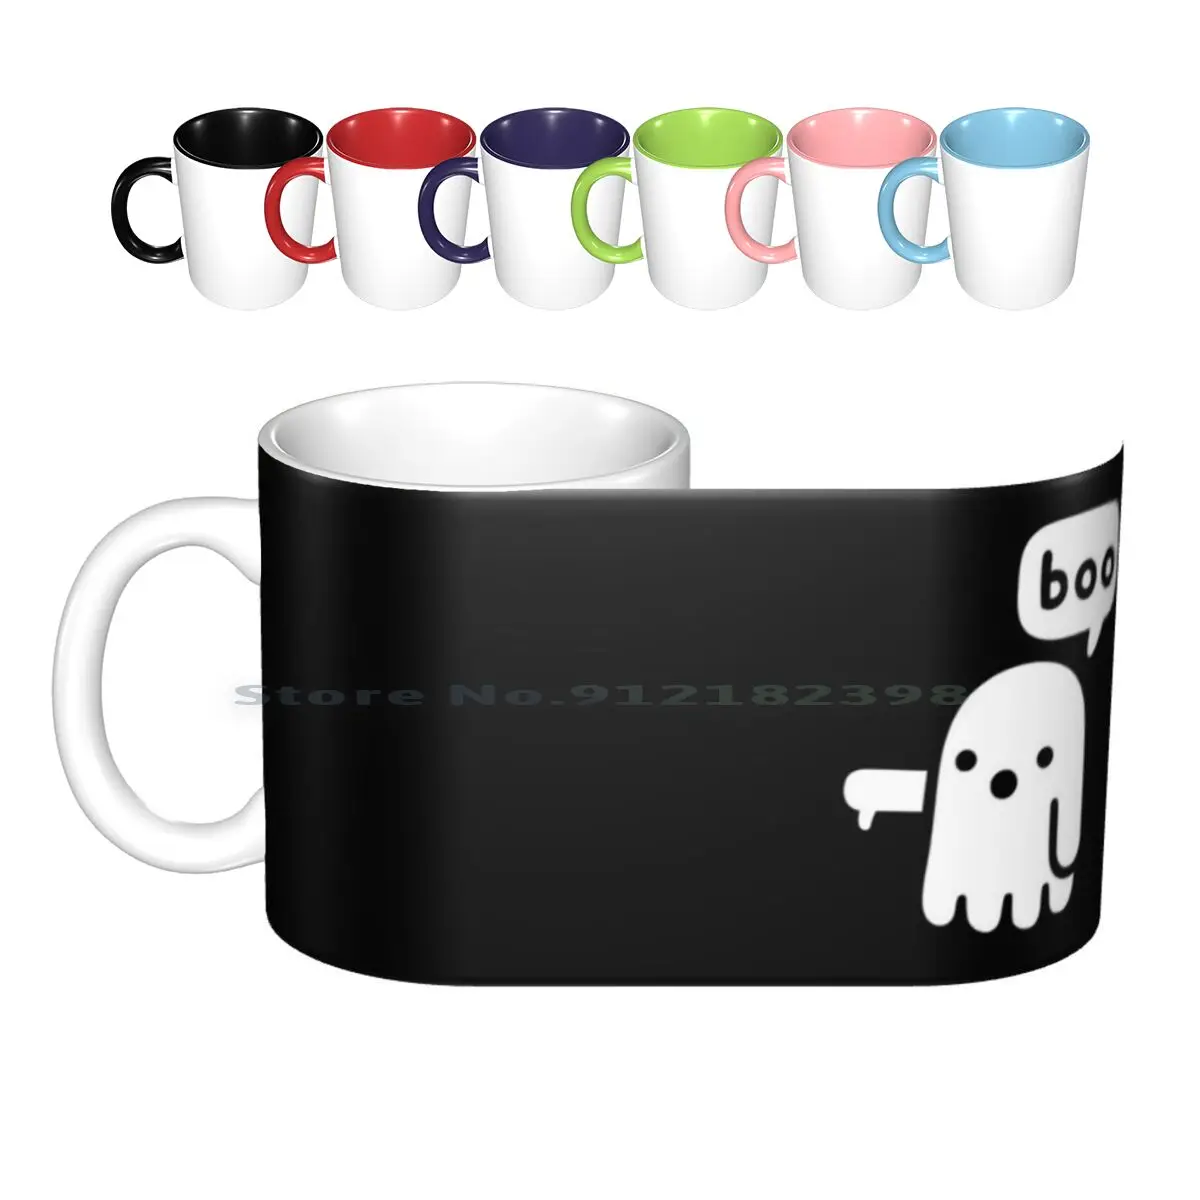 

Ghost Of Disapproval Ceramic Mugs Coffee Cups Milk Tea Mug Ghost Ghosts Boo Boos Lame Thumbs Down Unhappy Disapprove